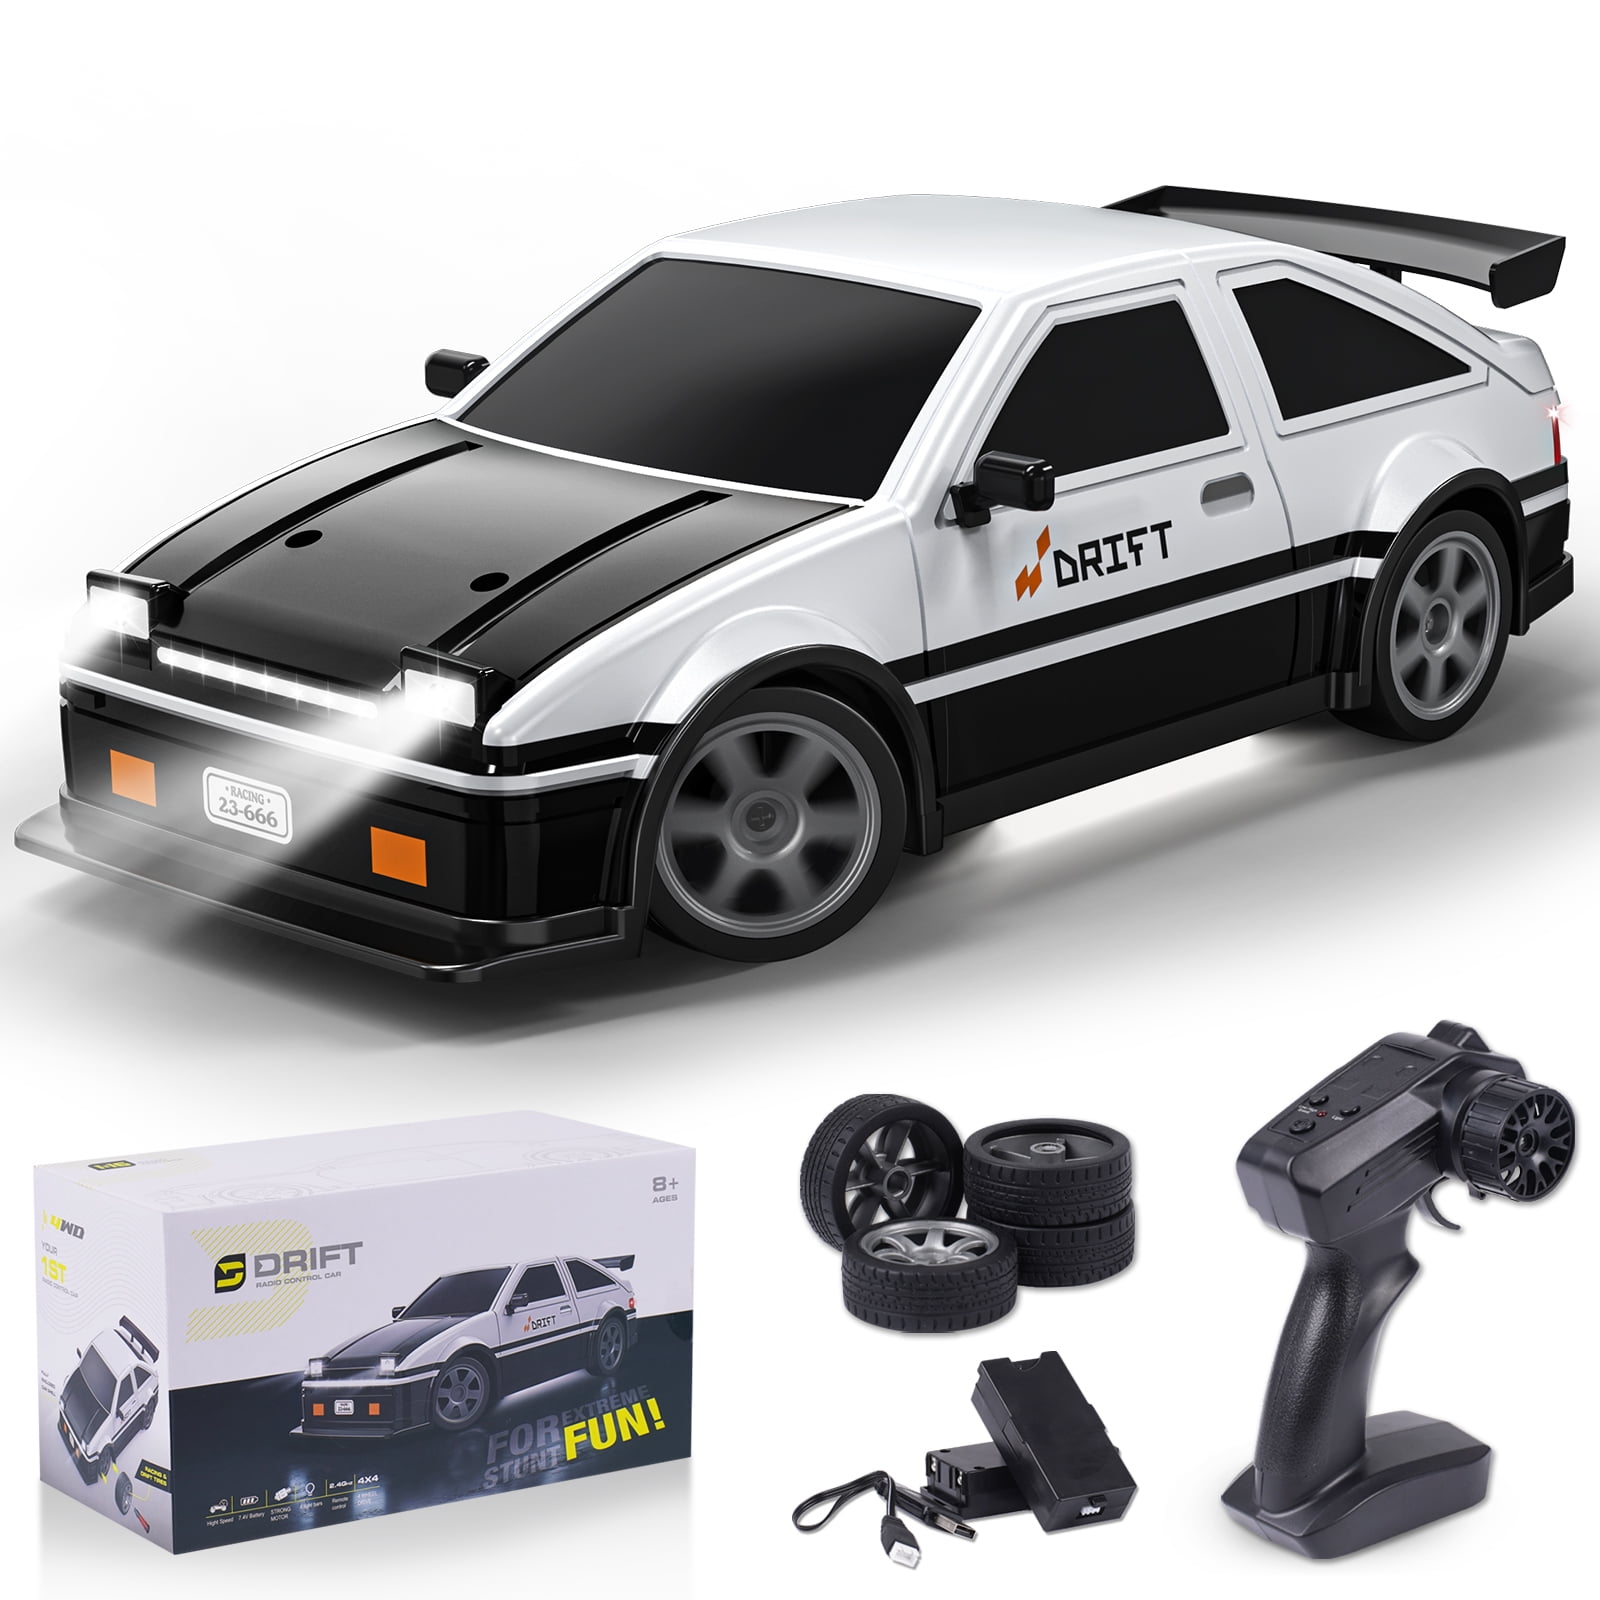 AUOSHI 1:16 RC Drift Cars High-Speed 4WD Remote Control Racing